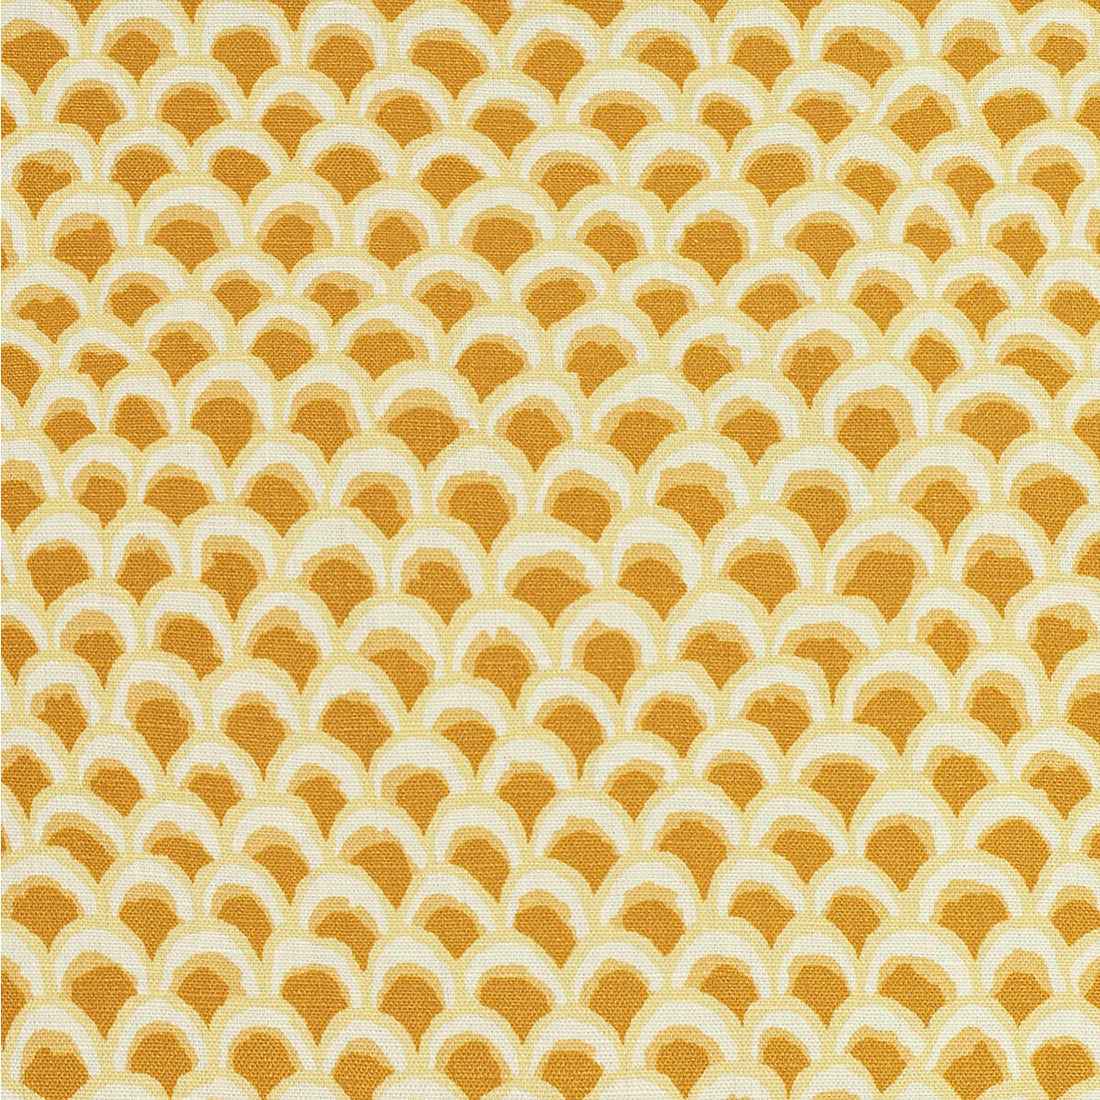 Pave II Print fabric in canary color - pattern 8020126.40.0 - by Brunschwig &amp; Fils in the Louverne collection